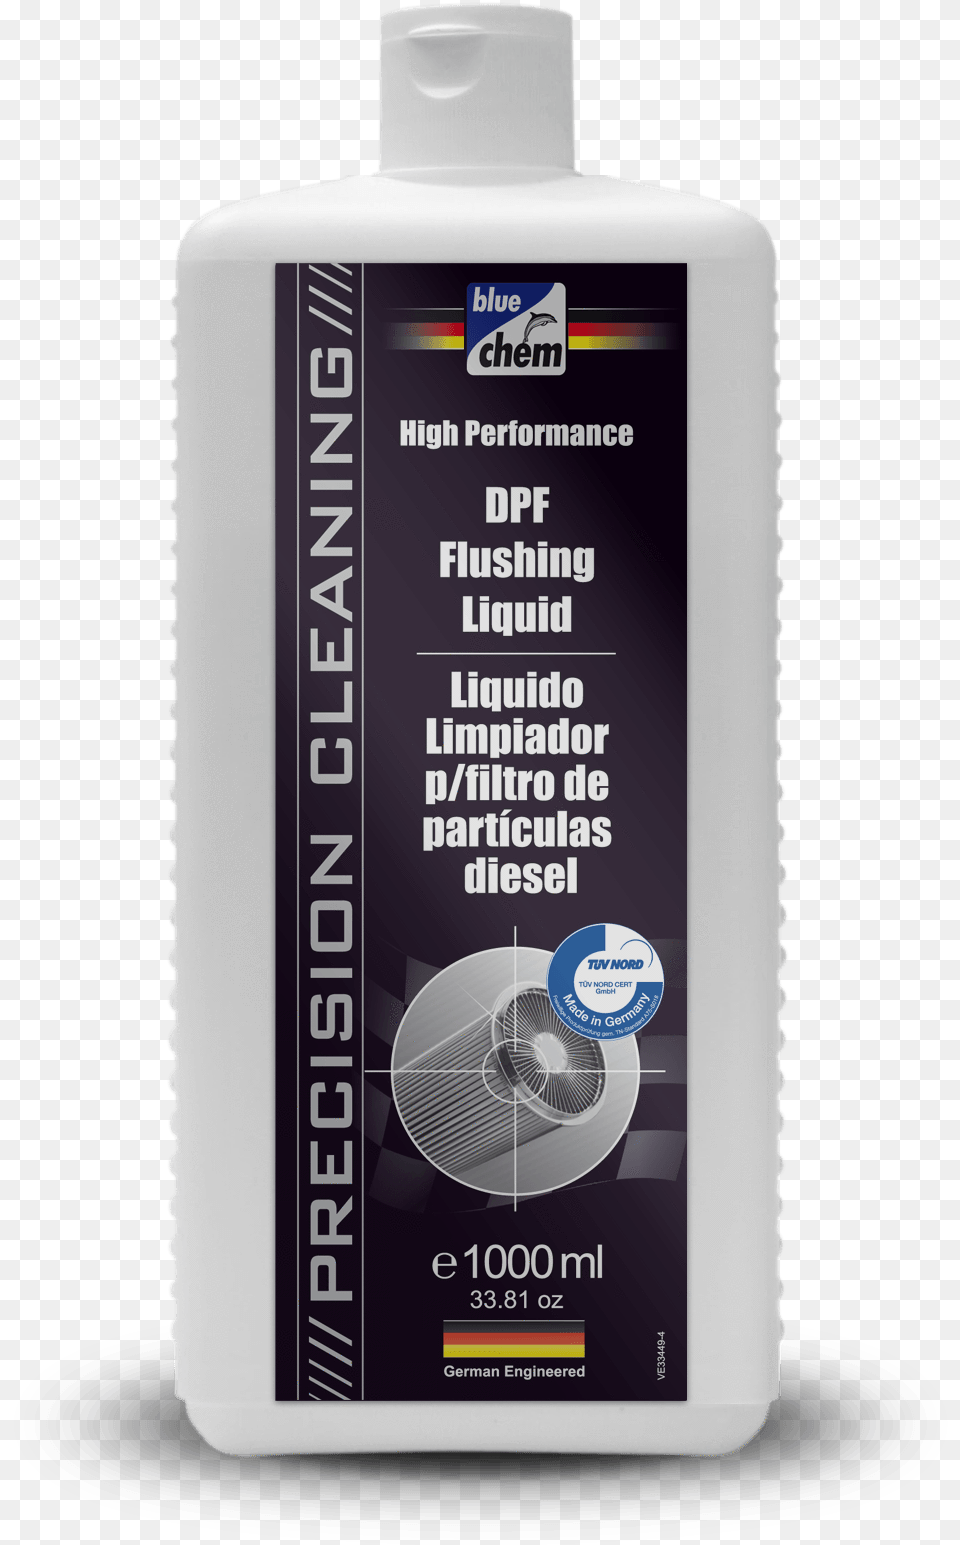 Dpf Flushing Liquid Cockle, Bottle, Cosmetics, Lotion, Perfume Png Image